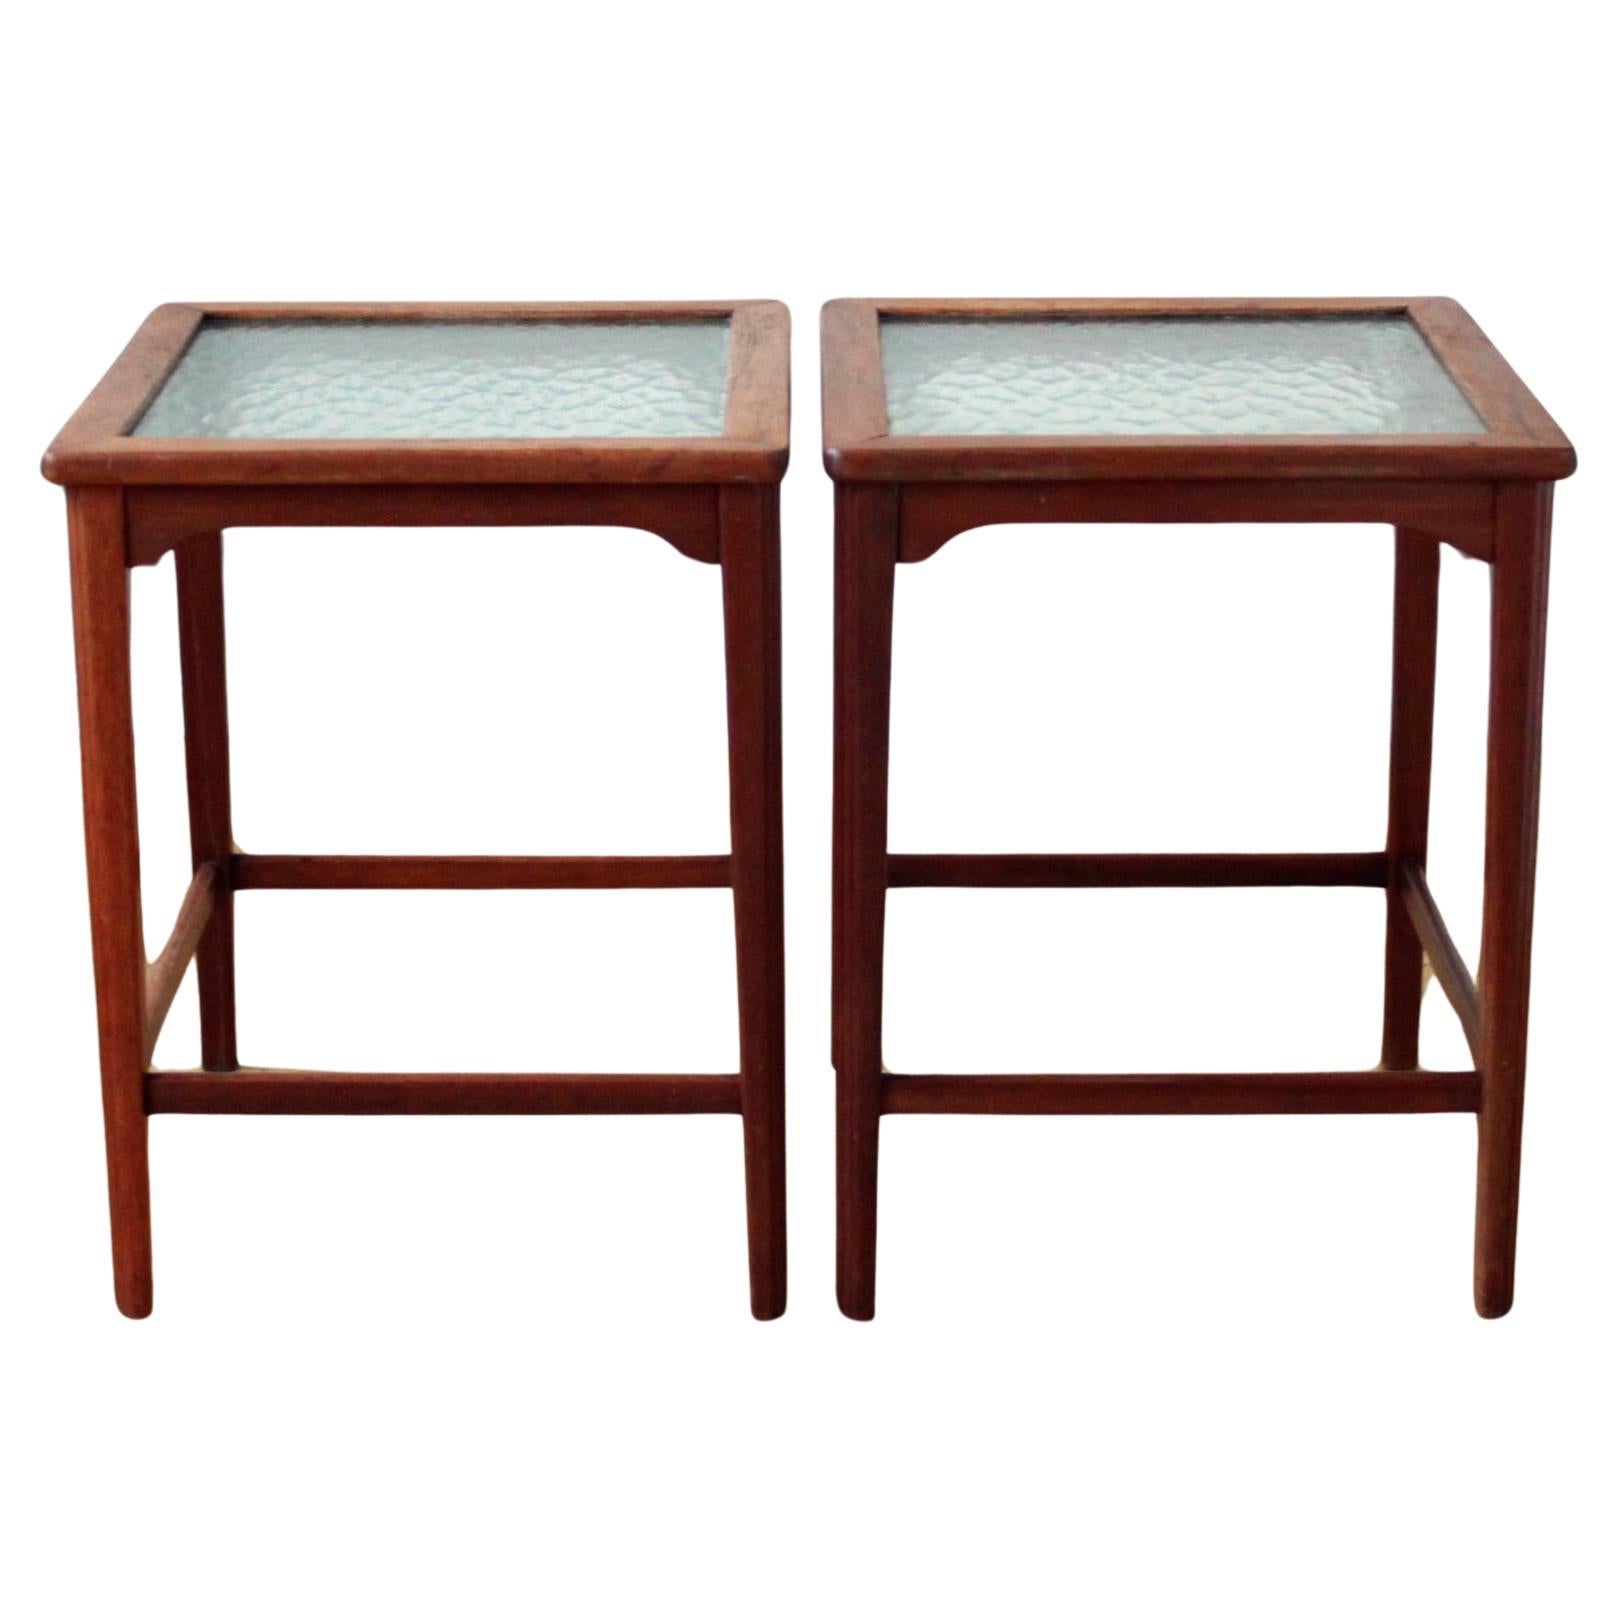 Pair of Scandinavian Modern Side Tables, Mahogany and Decorative Glass, 1940s  For Sale